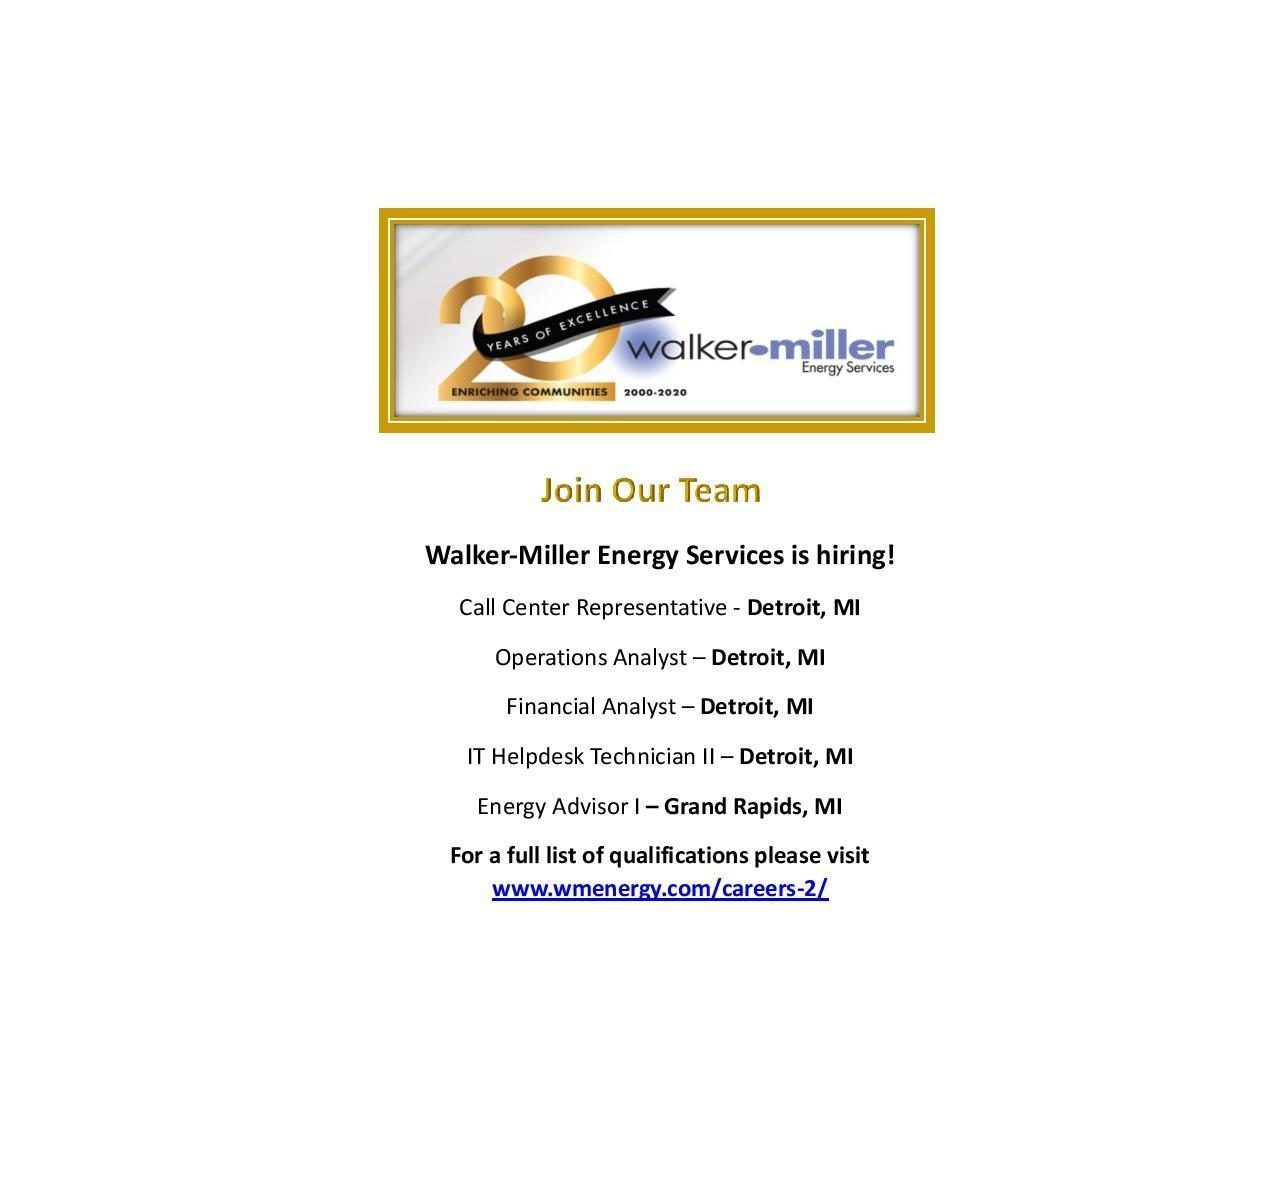 HELP WANTED: Walker Miller Energy Services